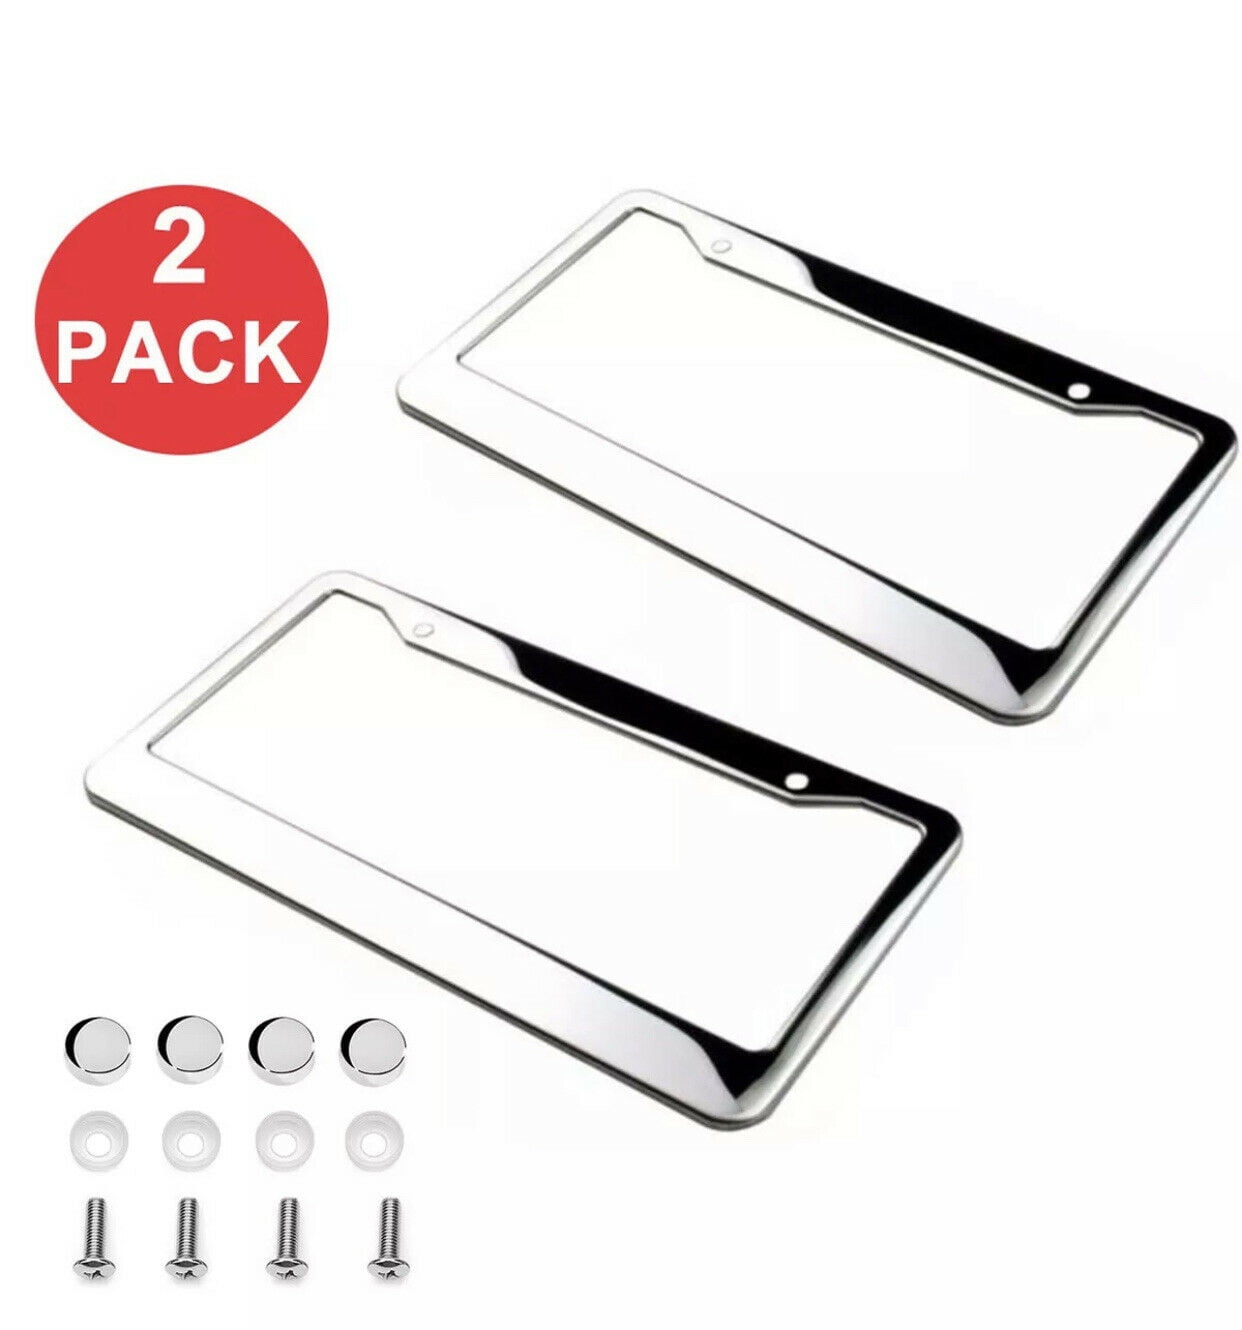 2* Chrome Stainless Steel License Plate Frame Tag Cover+Screw Cap Silvery Color 